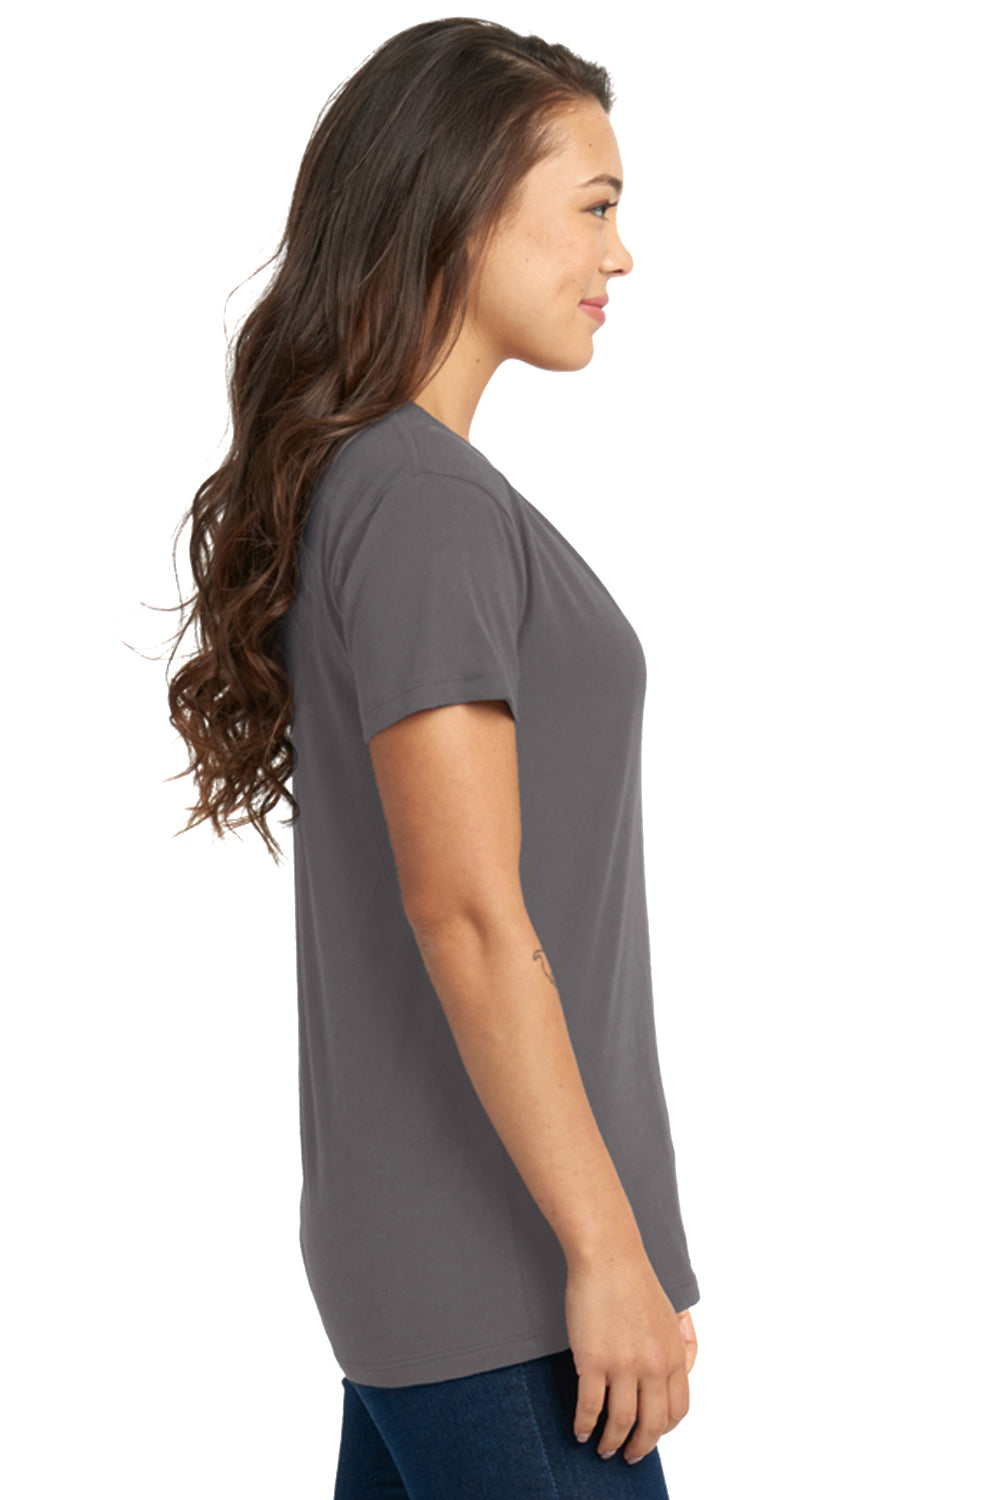 Next Level 3940 Womens Relaxed Short Sleeve V-Neck T-Shirt Heavy Metal Grey Side